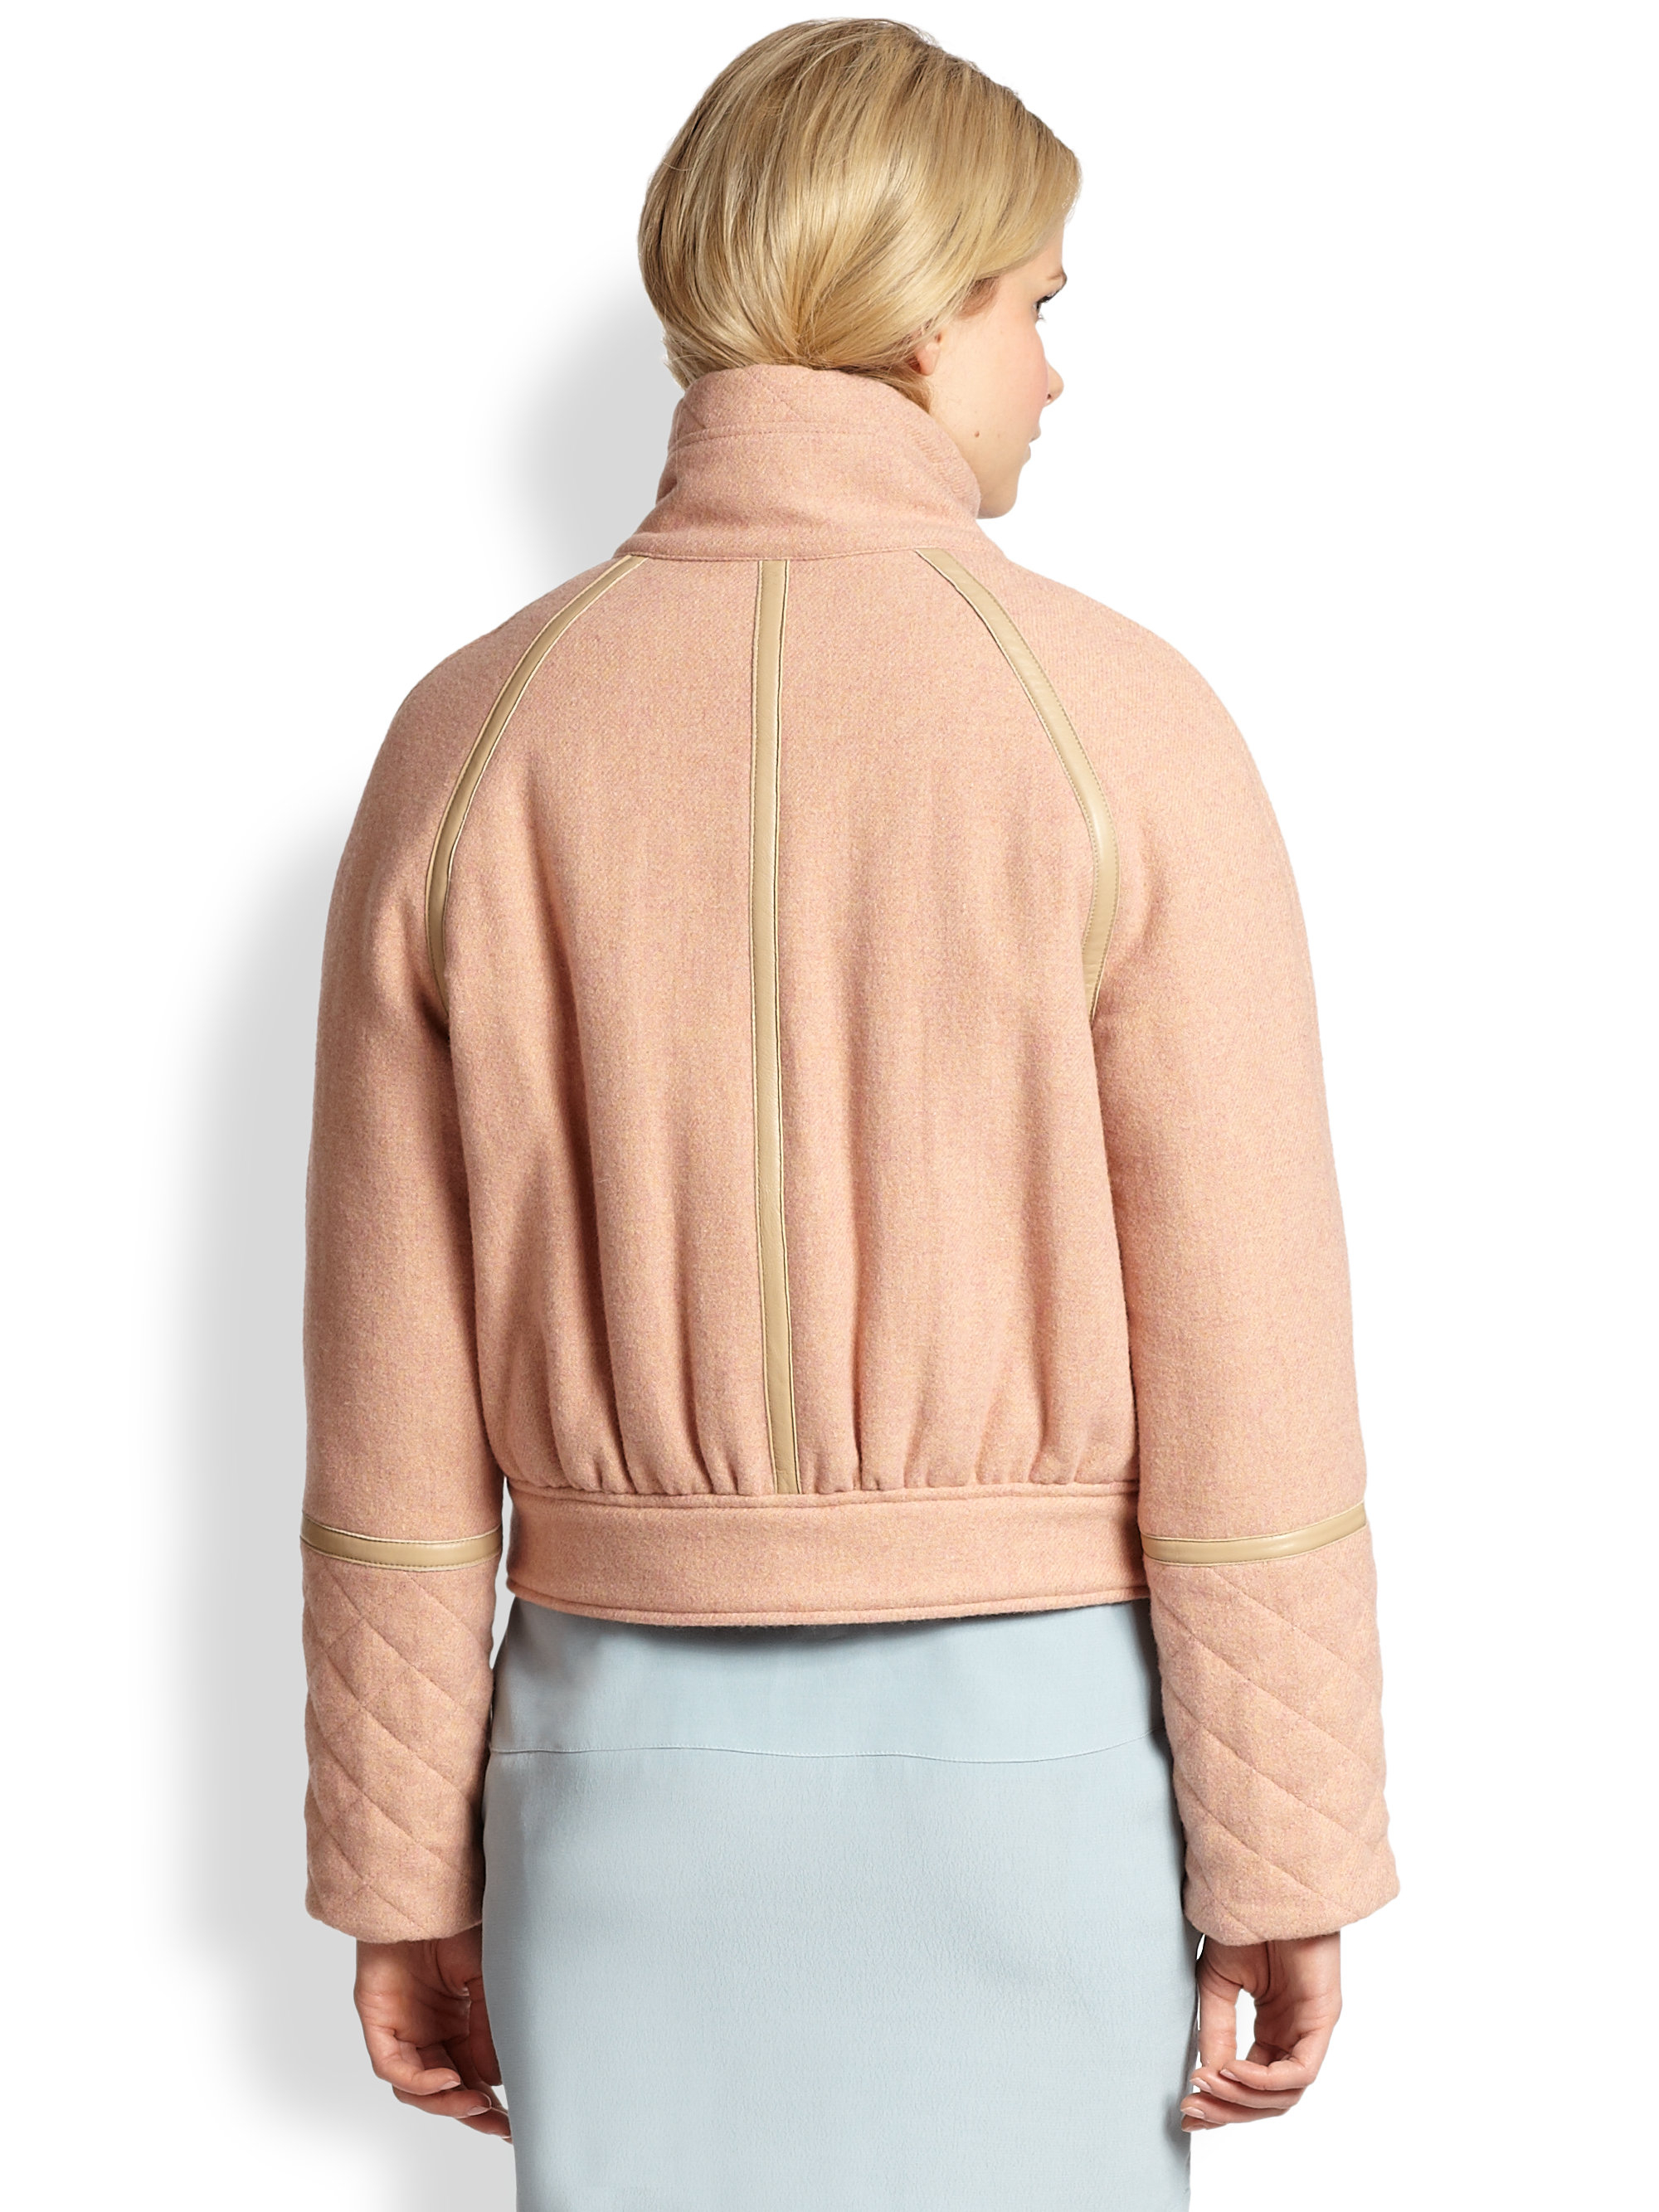 Lyst - See By Chloé Wool-Blend Bomber Jacket in Pink